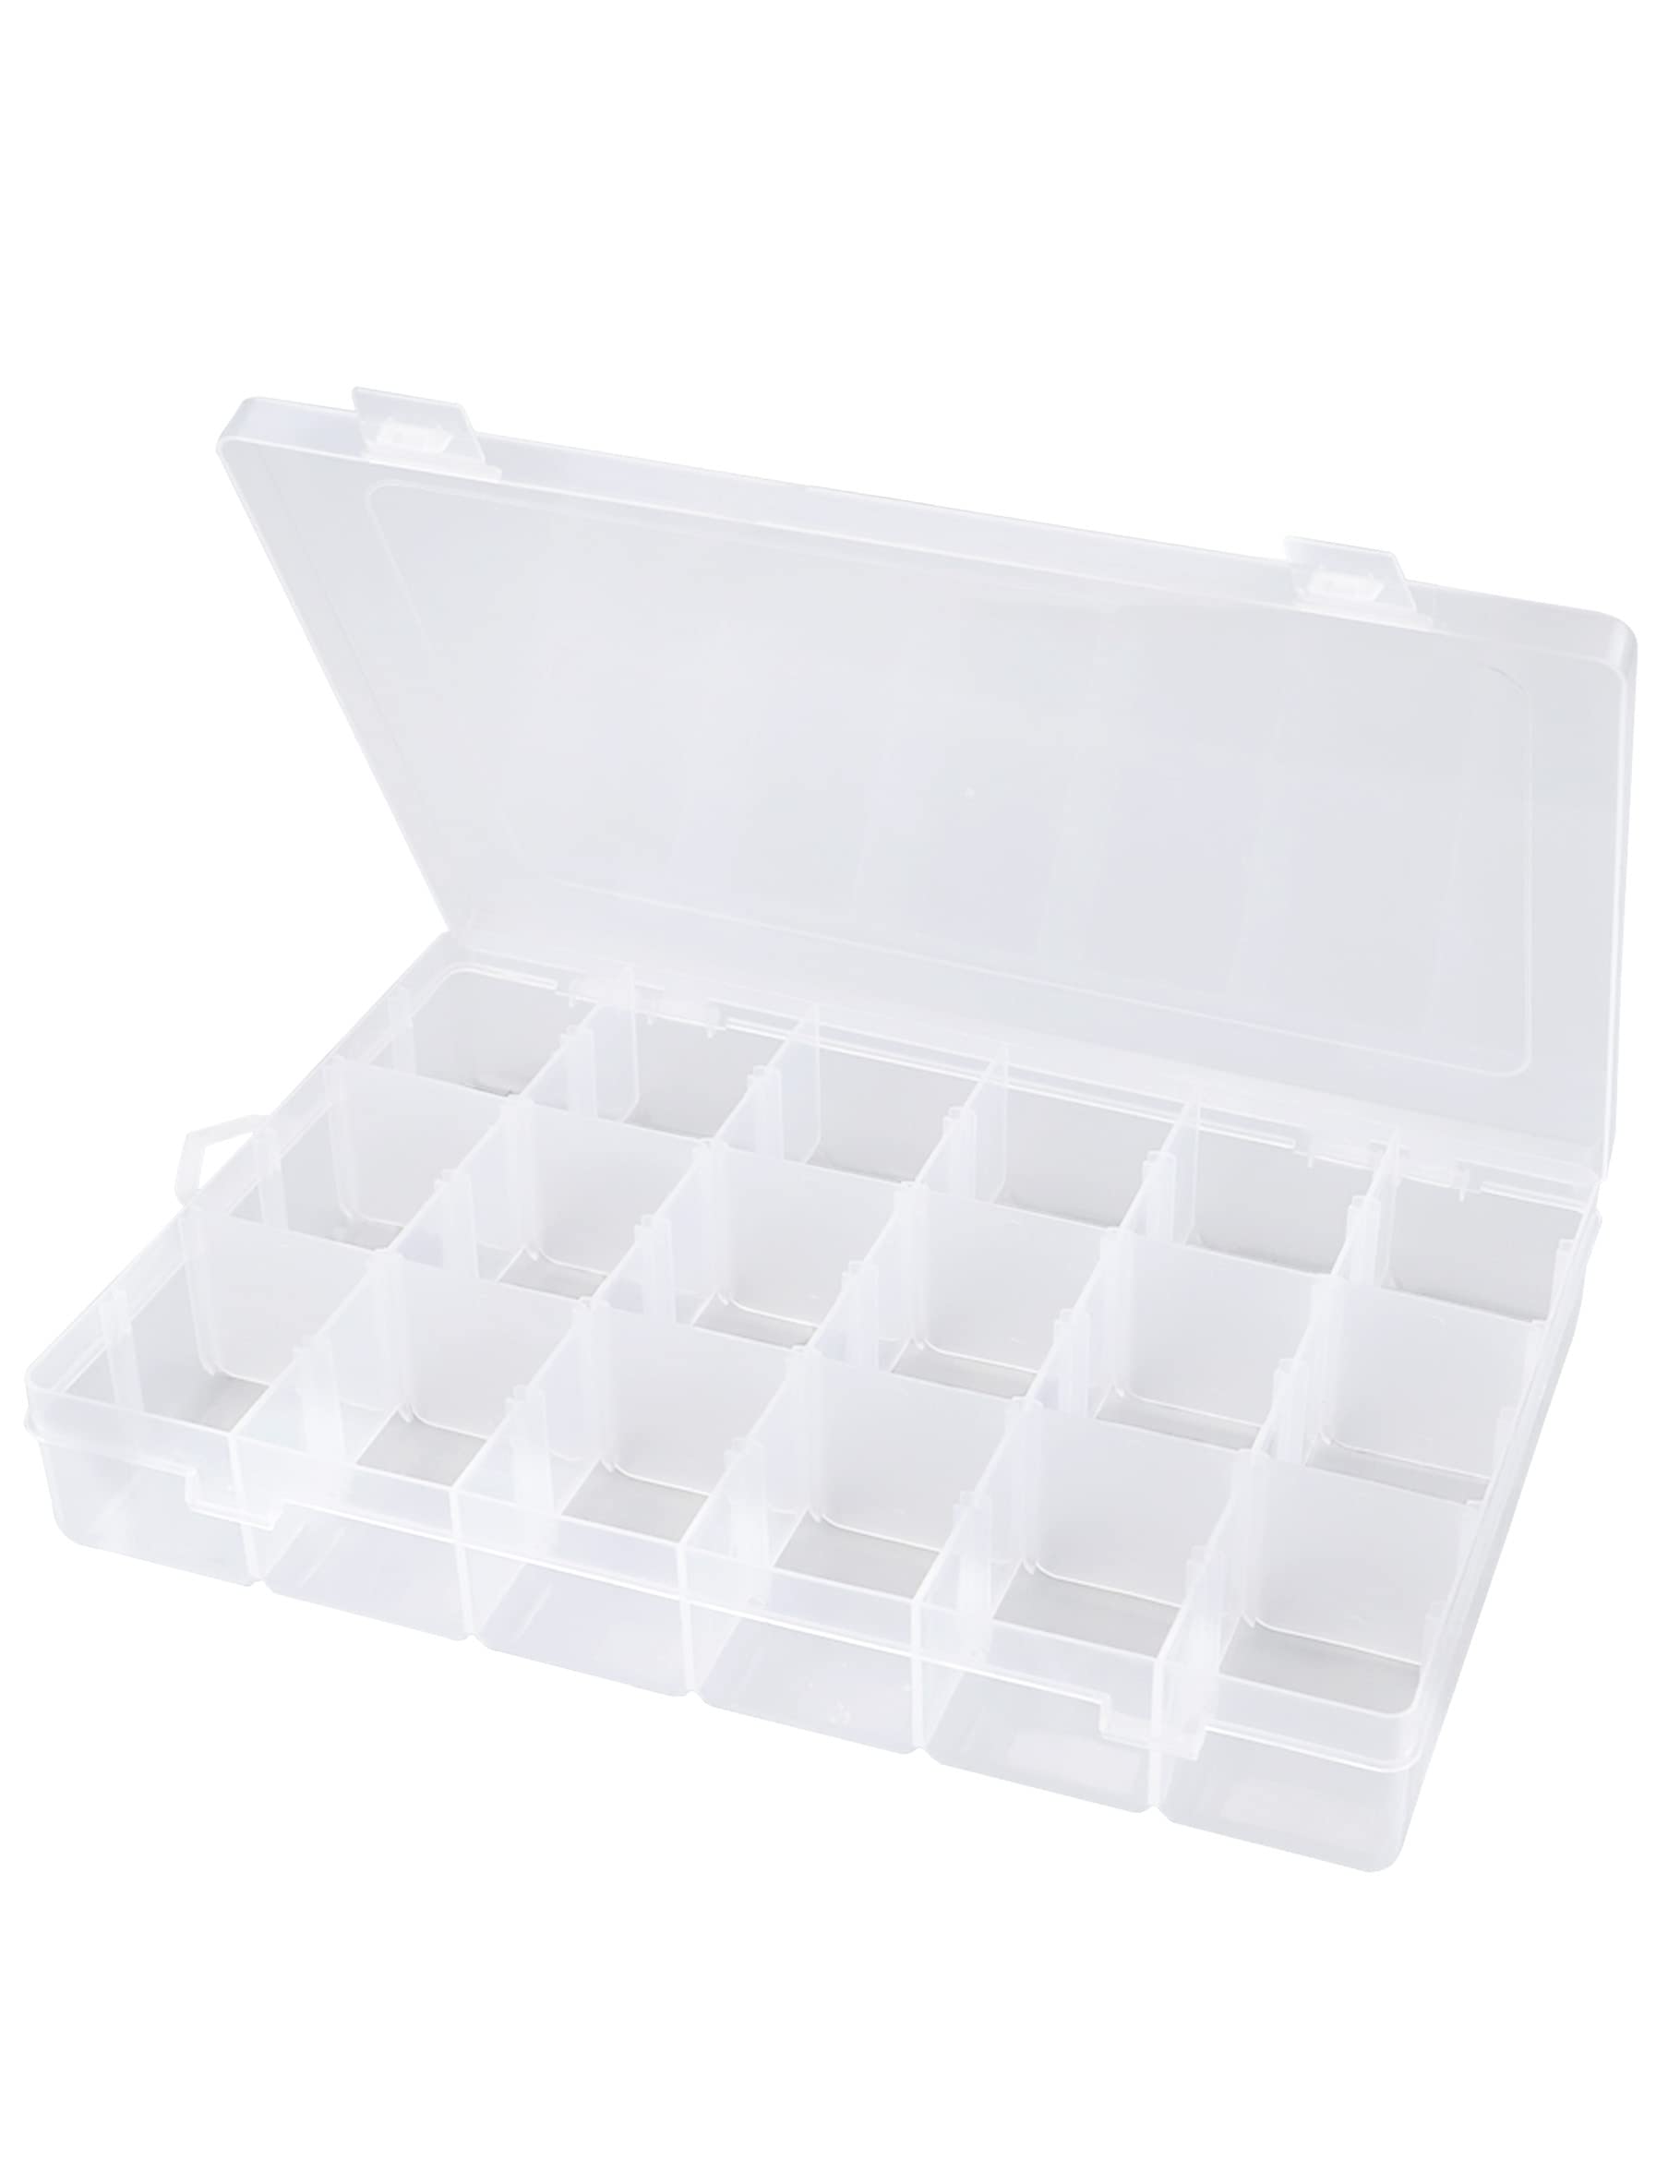  1 Piece Clear Beads Tackle Box 032 Fishing Lure Nail Art Small  Parts Plastic transparent Case Storage Organizer Containers kisten boxen  boite : Sports & Outdoors